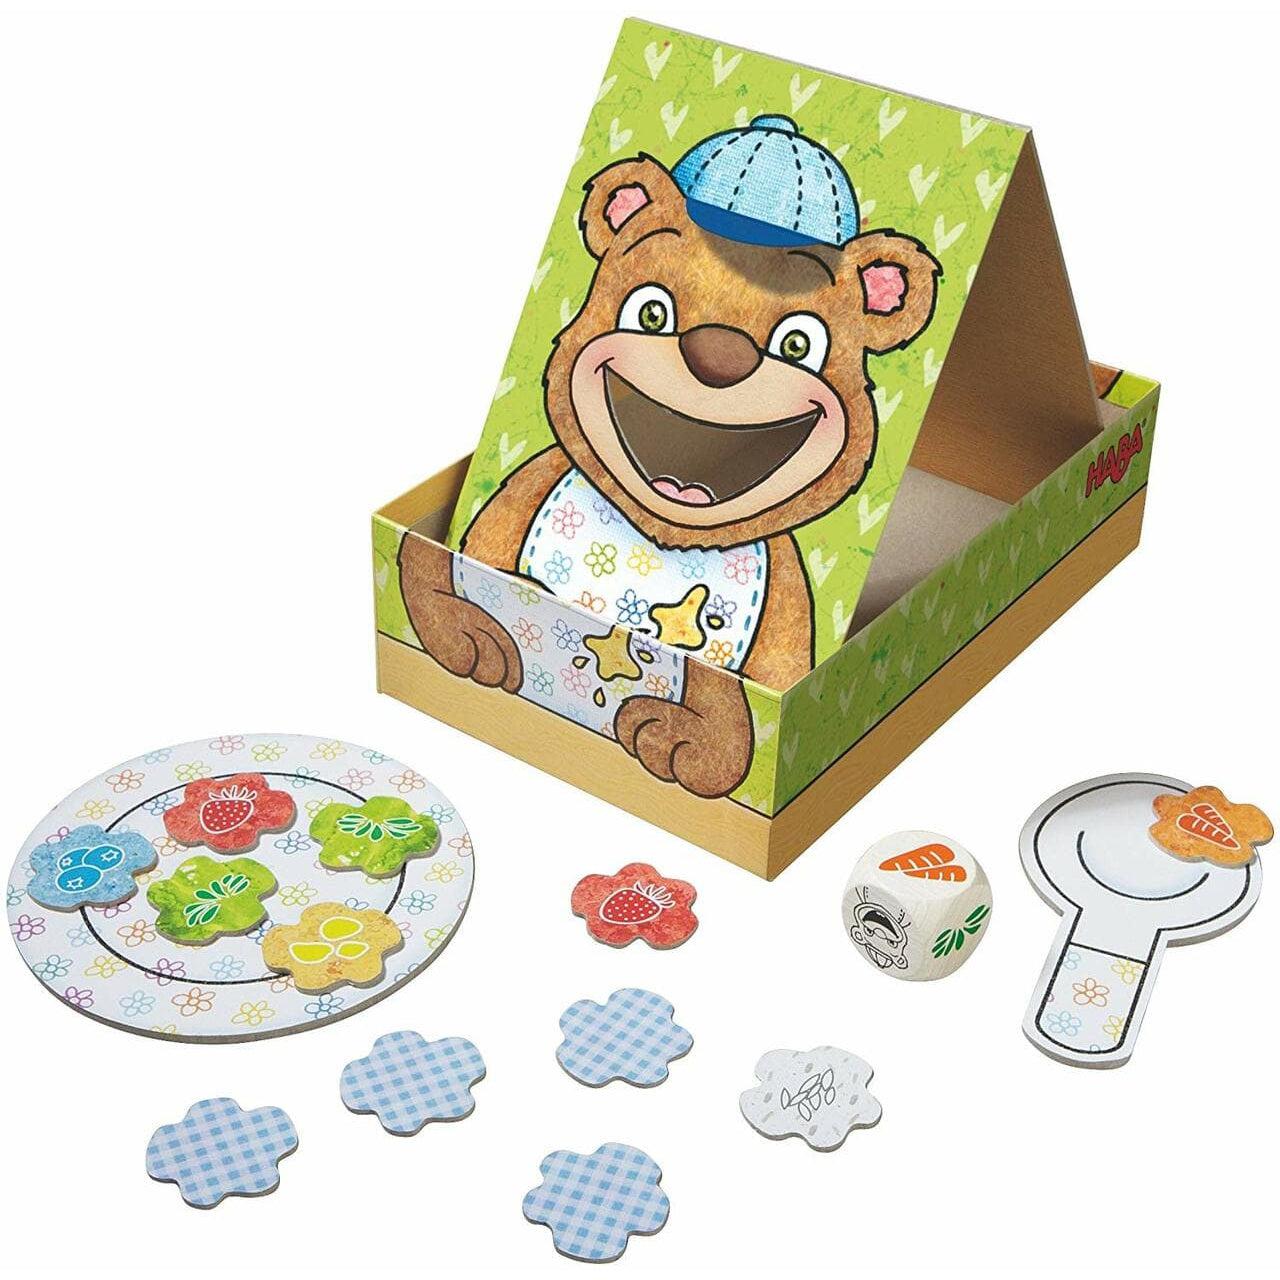 Haba-My Very First Hungry Bear-301257-Legacy Toys